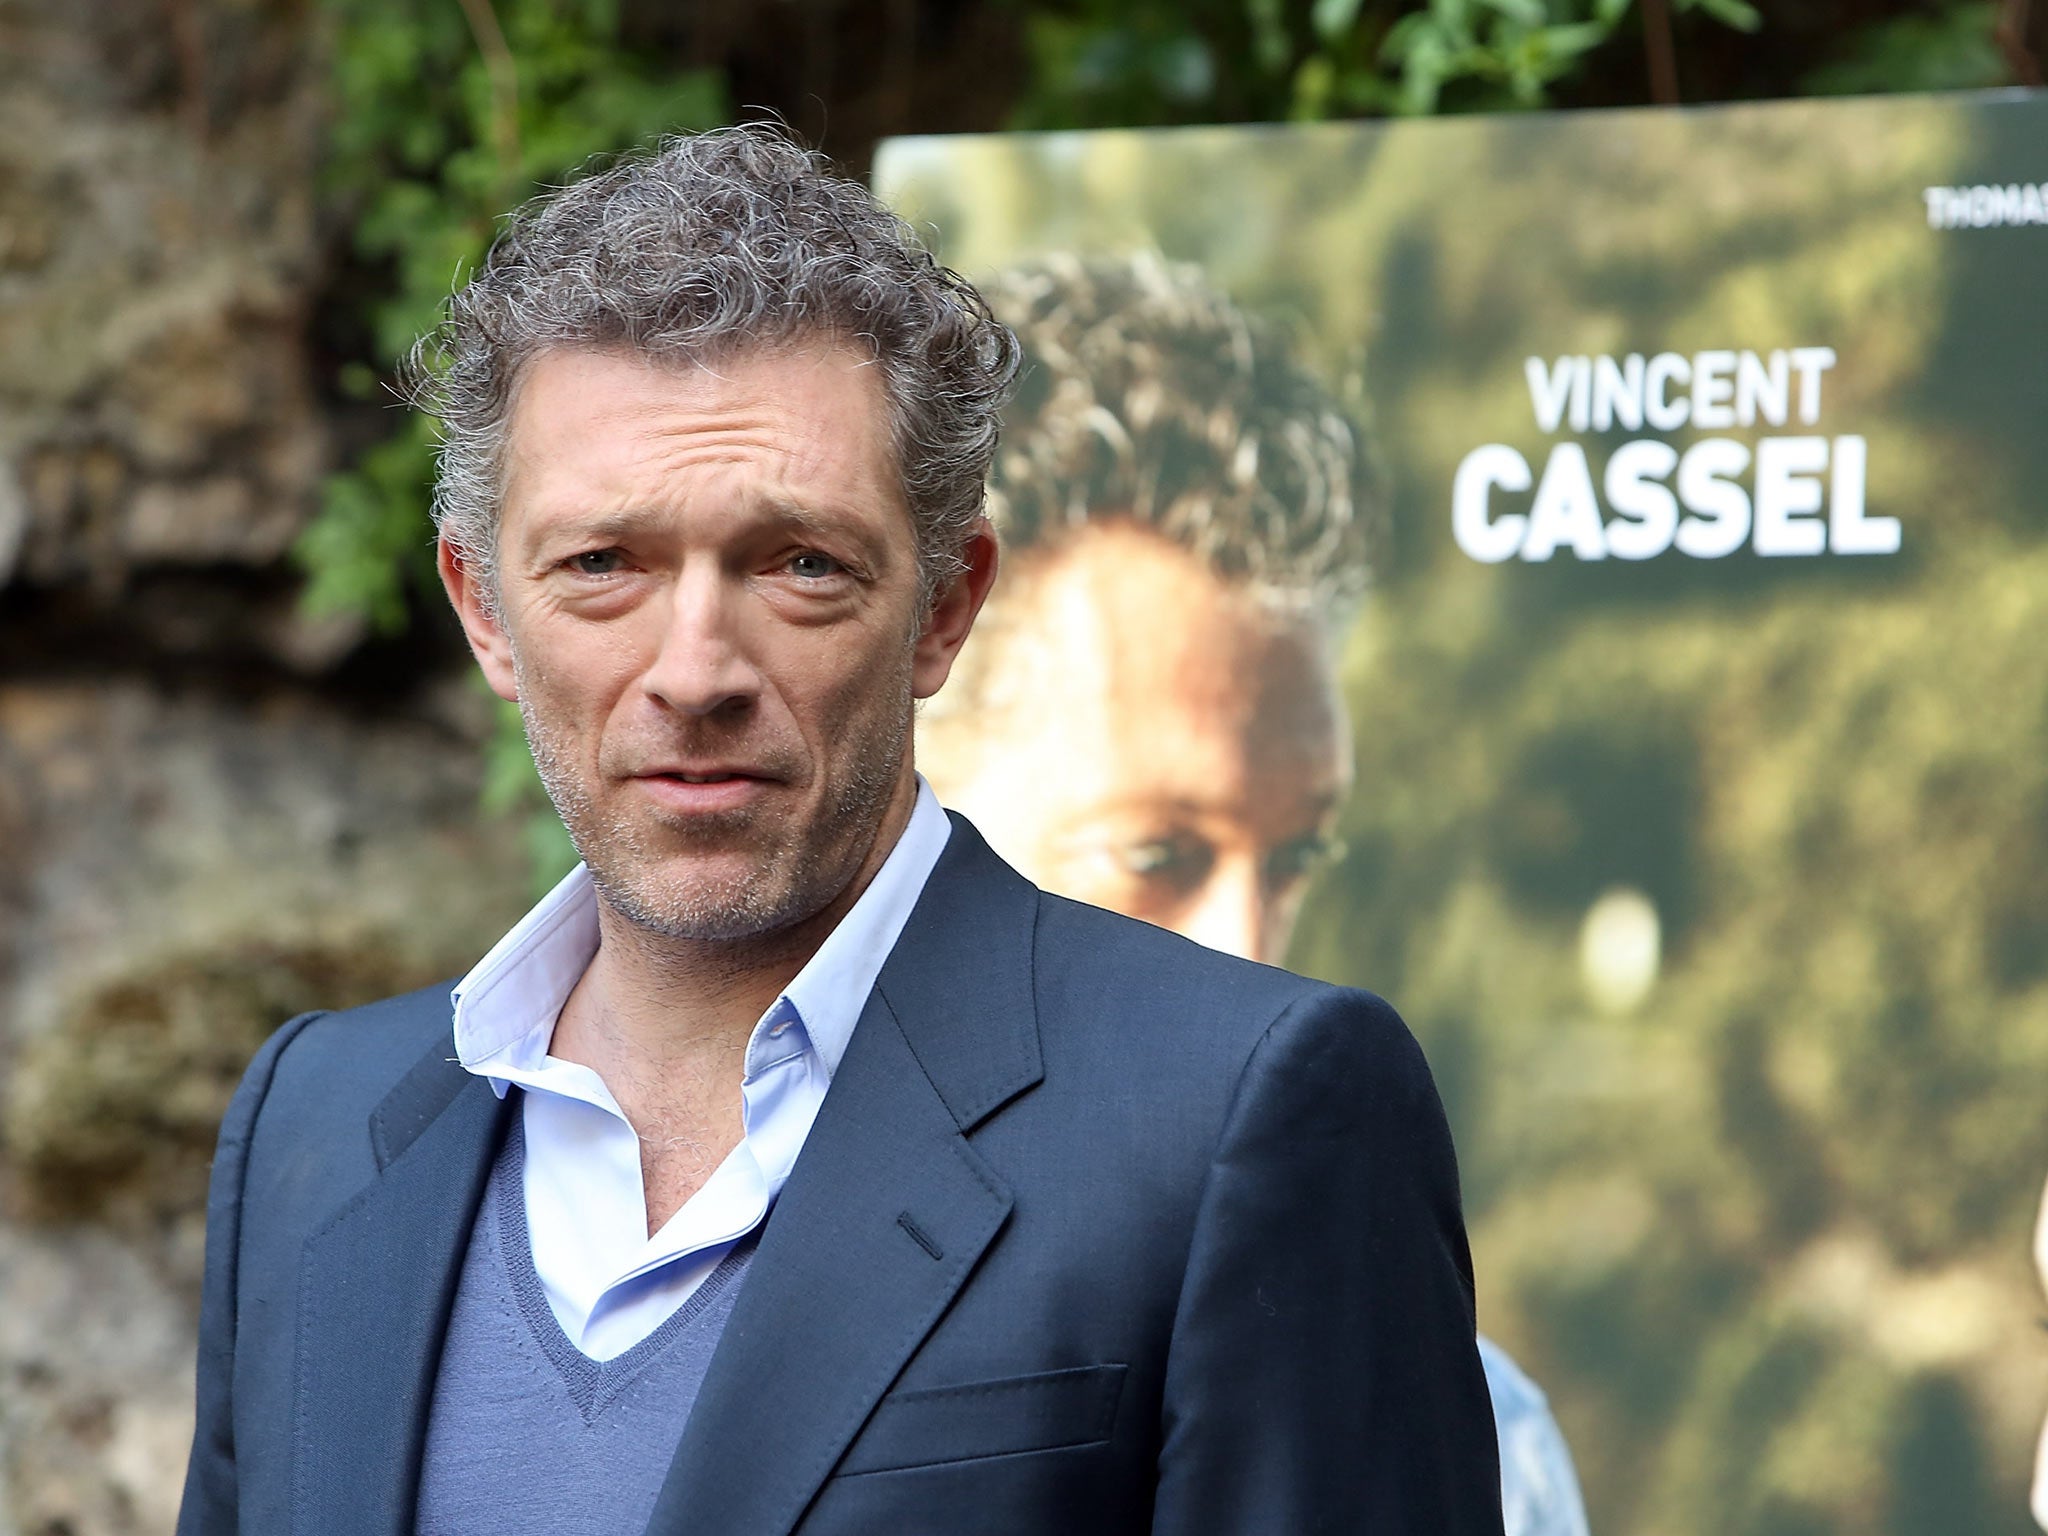 &#13;
Actor Vincent Cassel said some of the meaning in his new film was lost by having characters speak in a different language (AP) &#13;